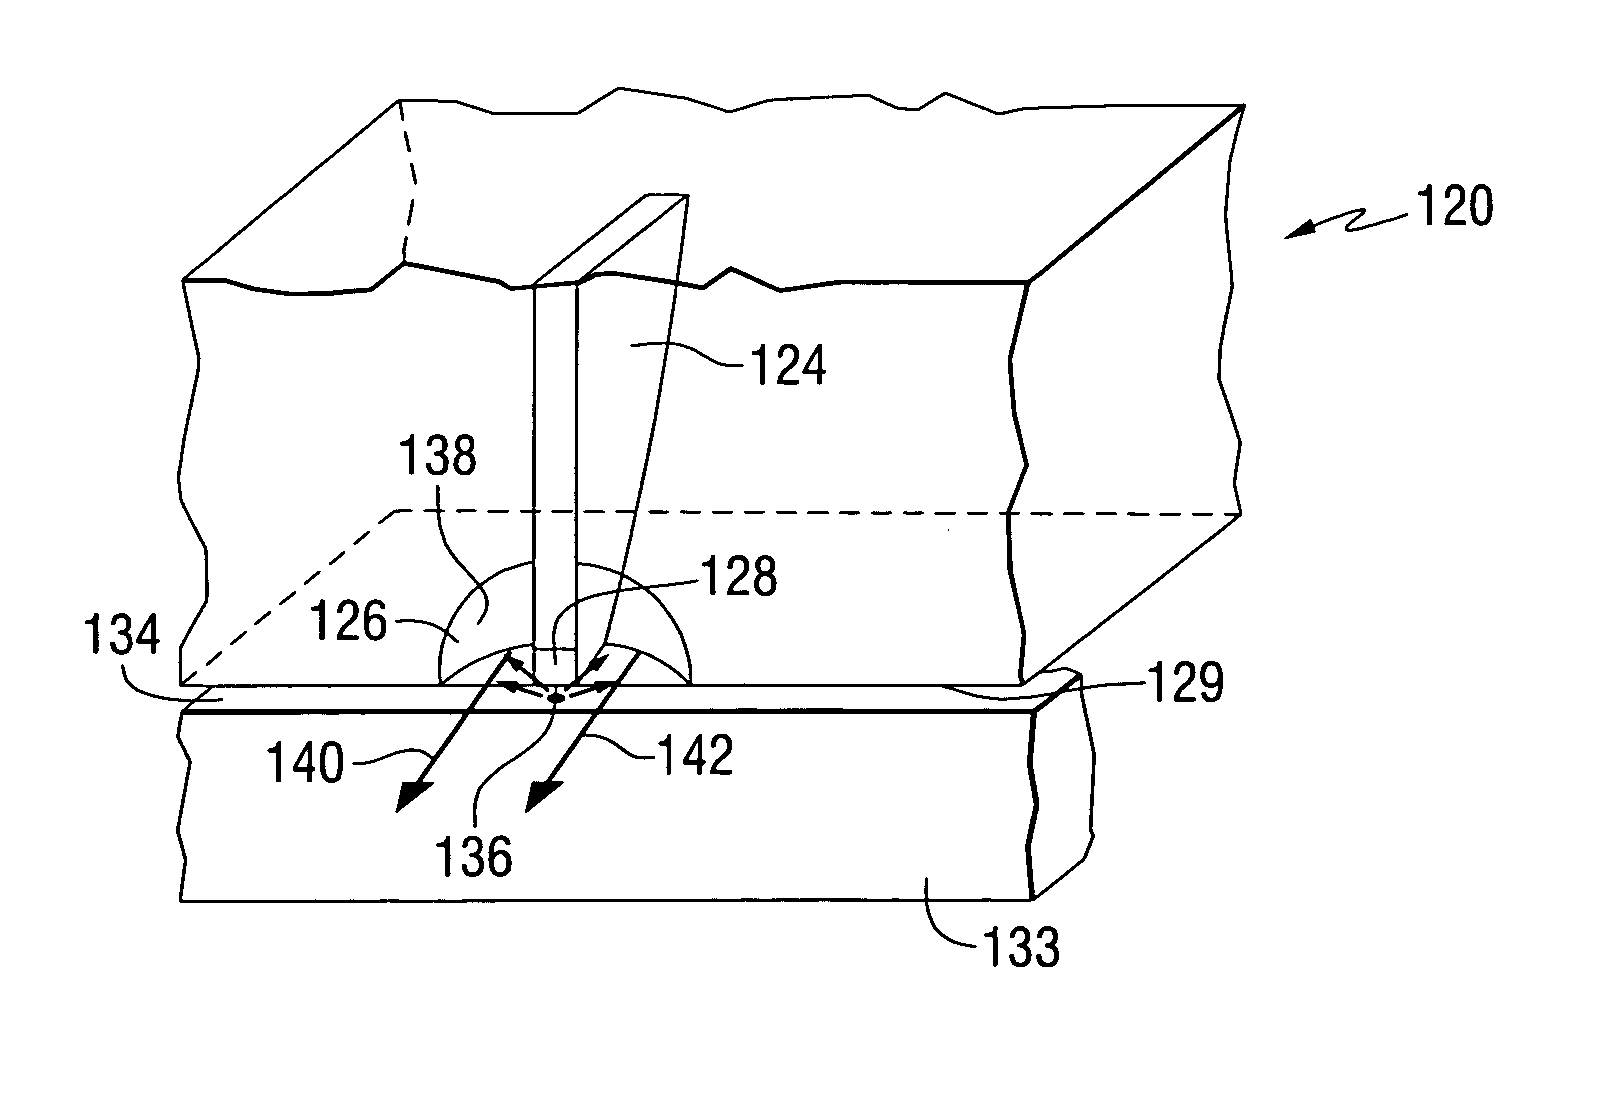 Optical recording using a waveguide structure and a phase change medium